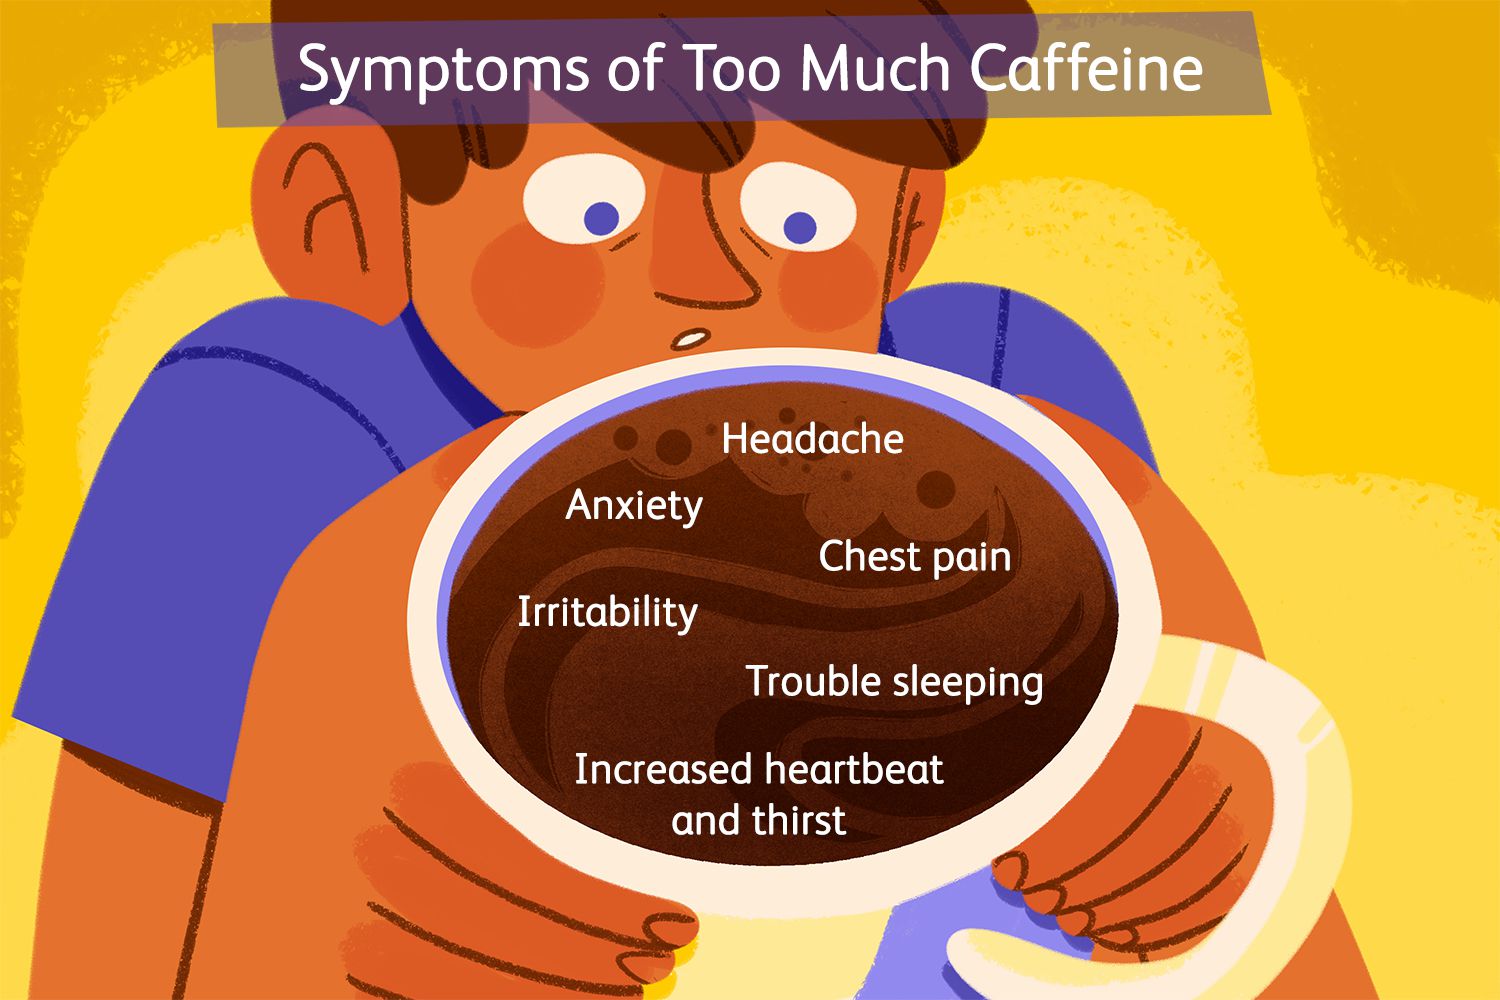 What to Do If Caffeine Causes Shortness of Breath?